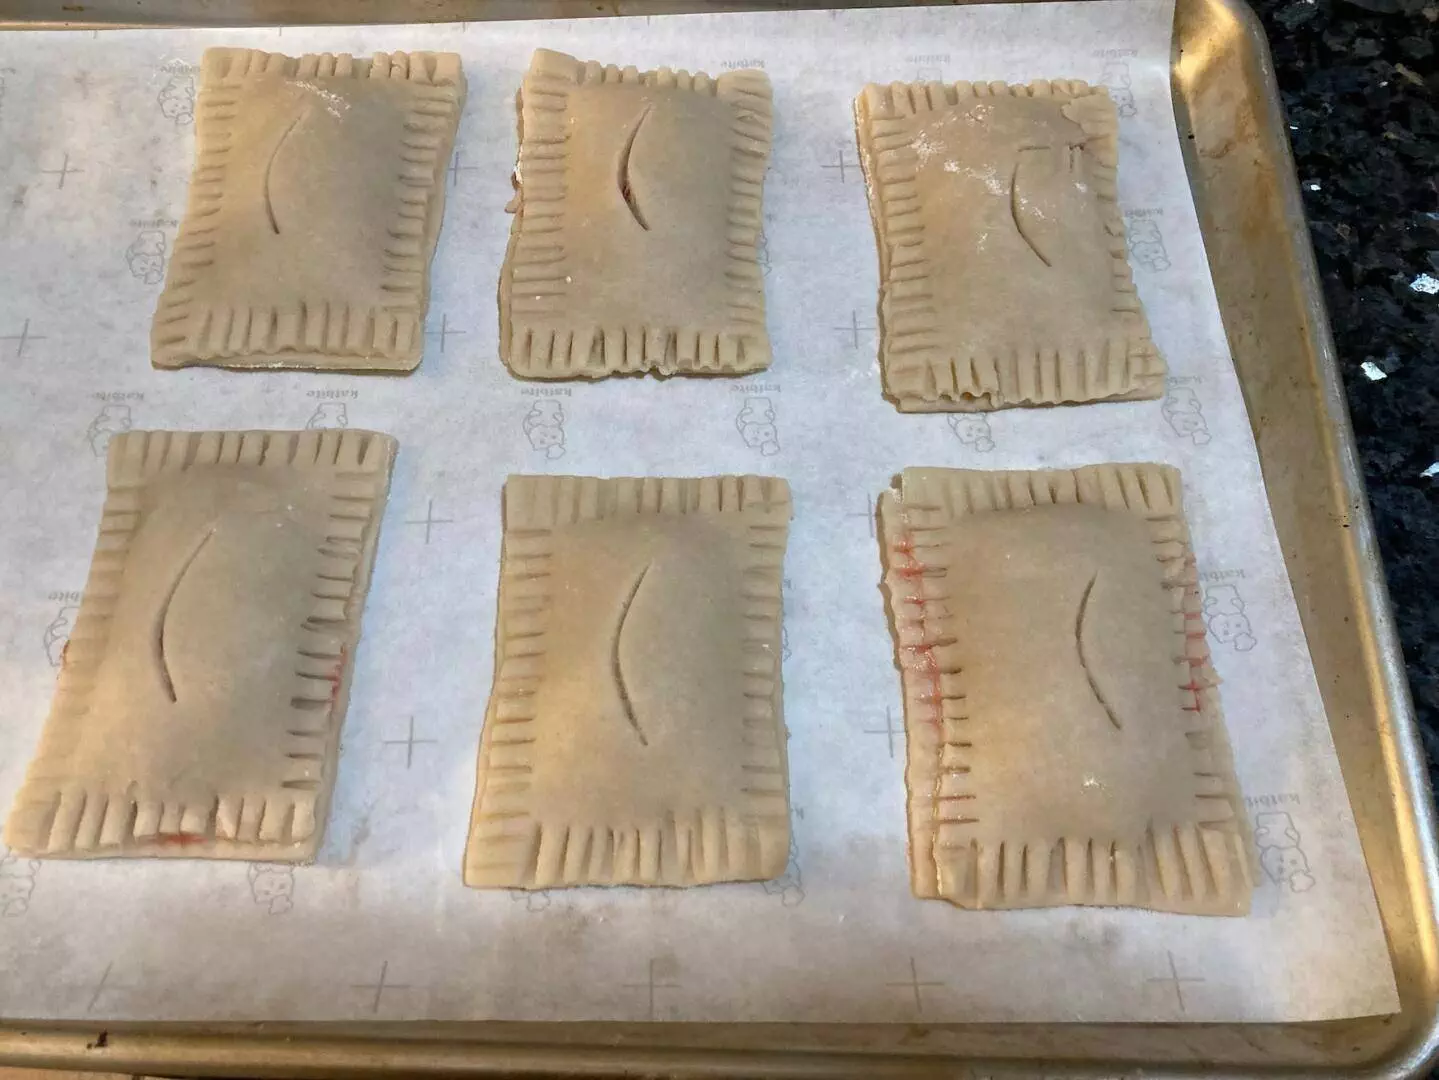 Homemade Pop Tarts from Out of the Box Baking.com